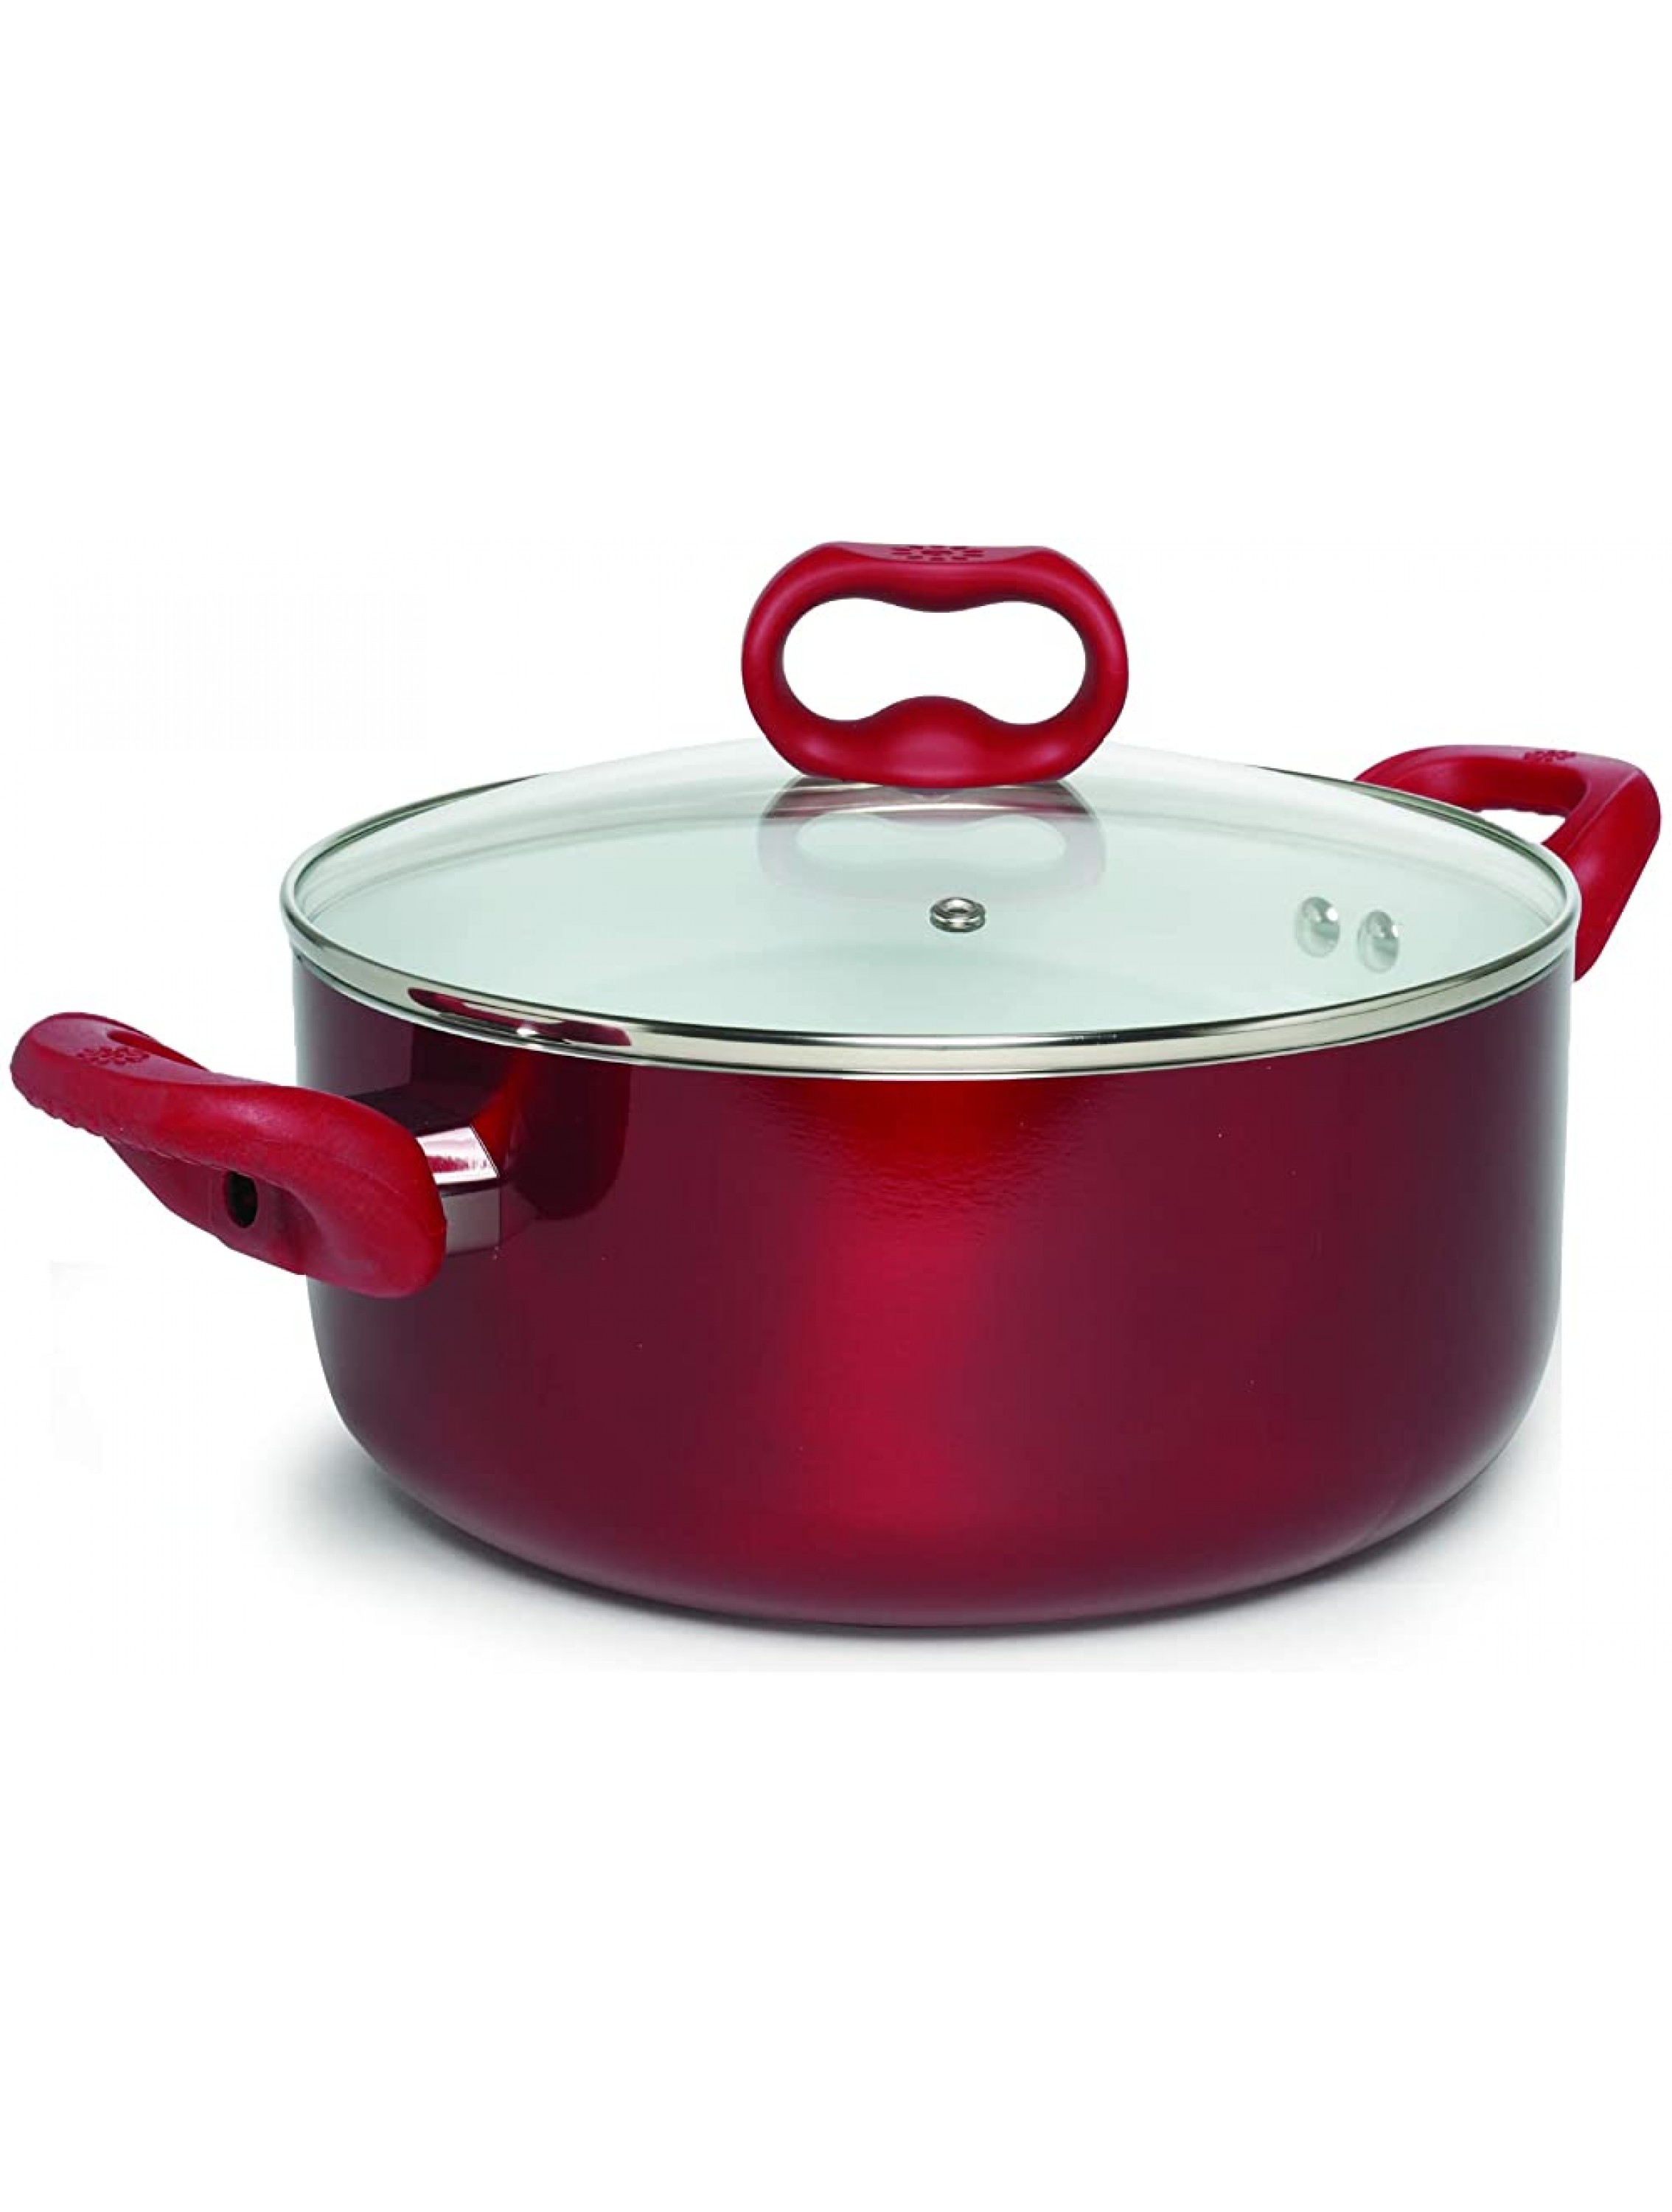 Ecolution Bliss 5 Quart Non-Stick Ceramic Stock Pot with Lid Cover Dutch Oven Multipurpose Use Silicone Stay Cool Handles Easy Clean Red - B4X1MQRV4